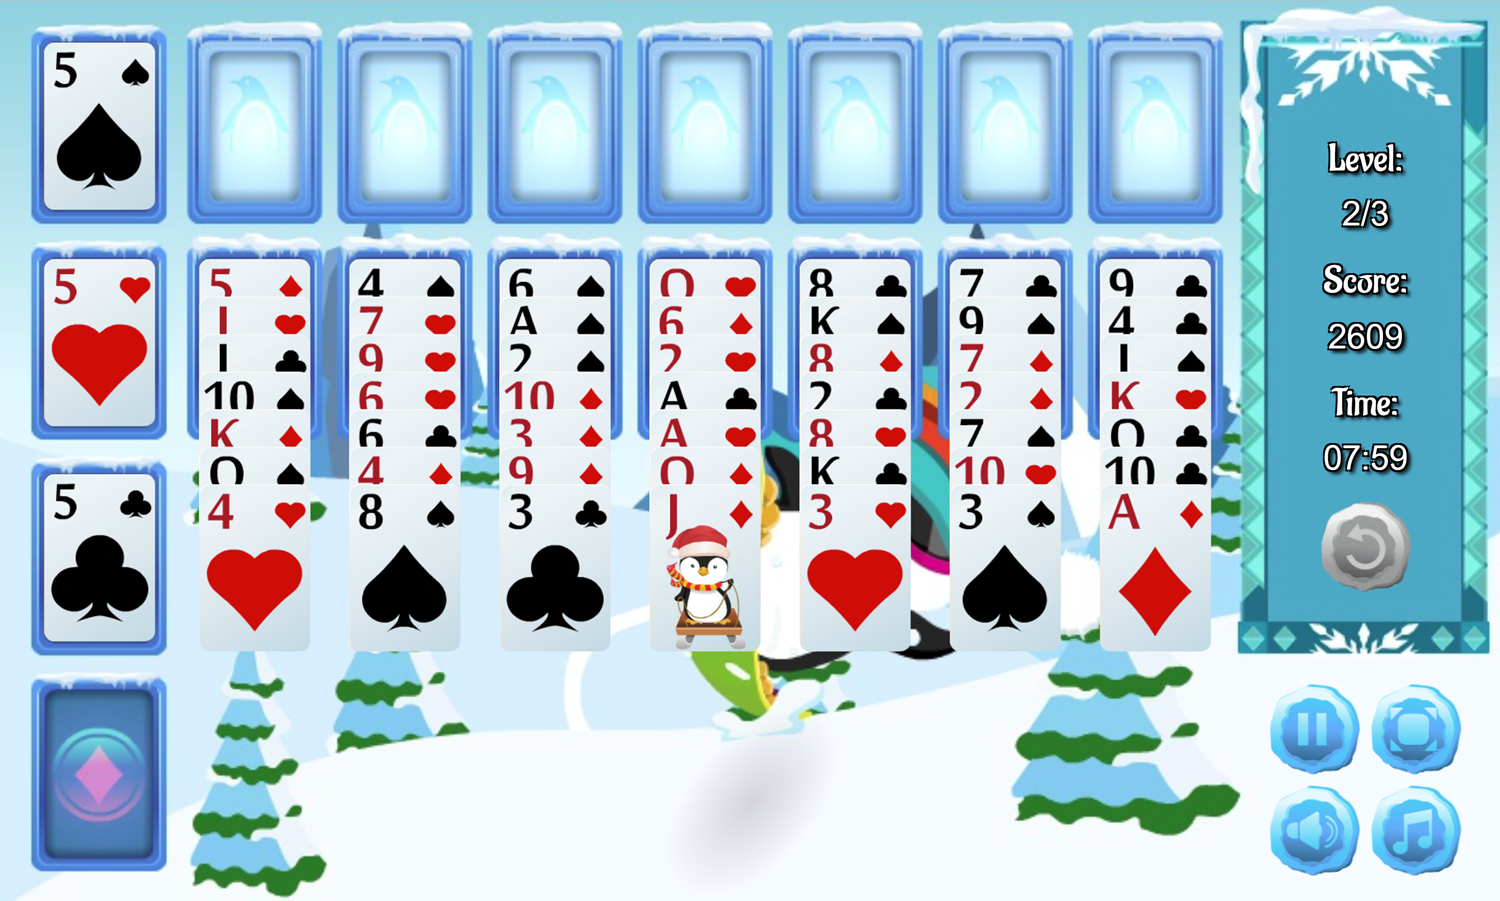 Penguin Solitaire Game Second Level Screenshot.